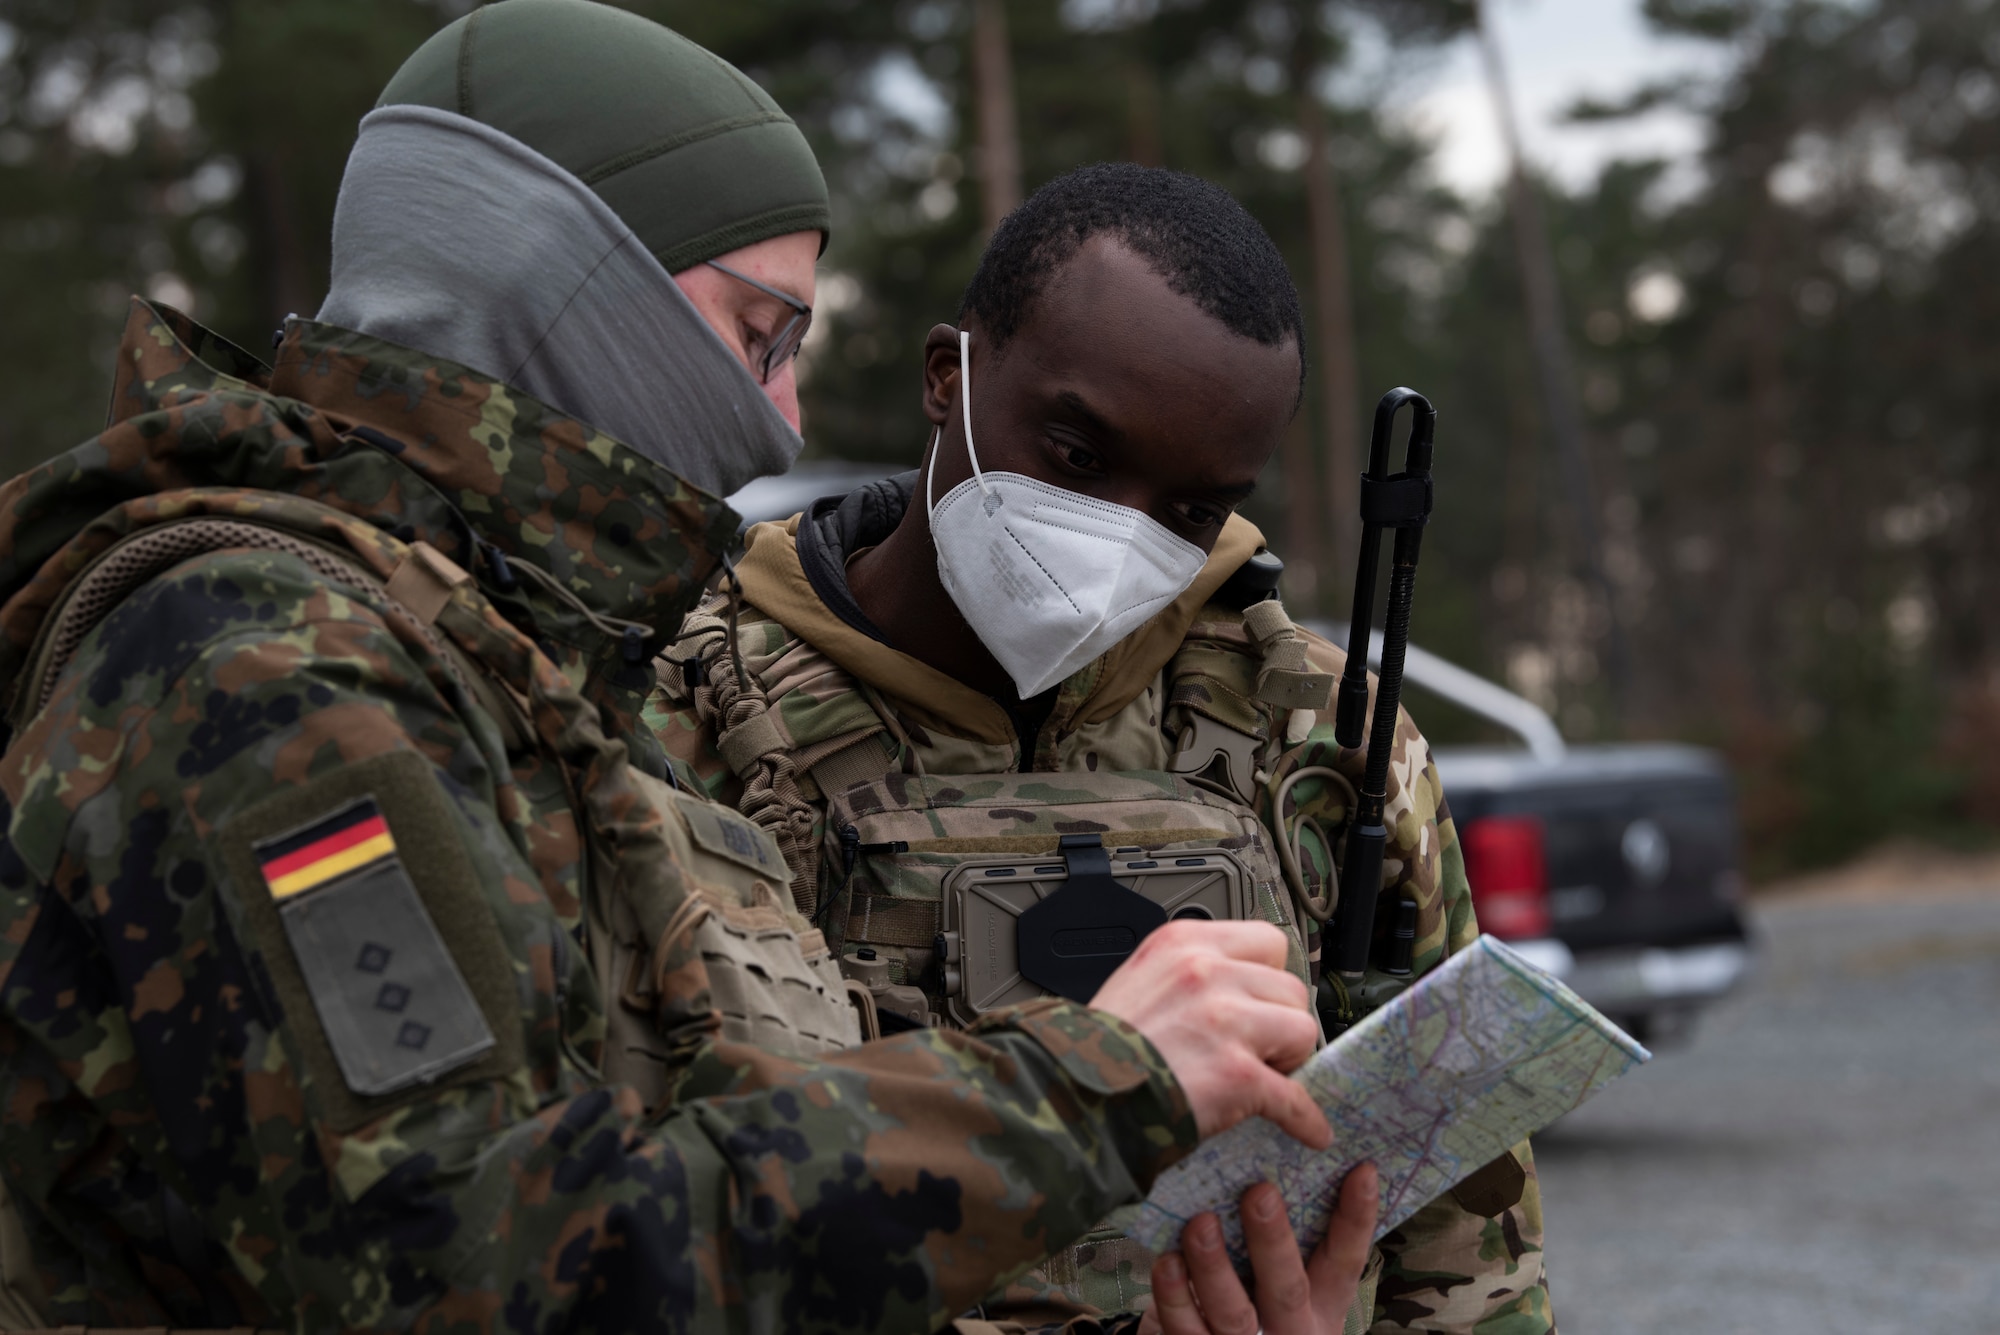 An Airman speajs with a member of the German armed forces.